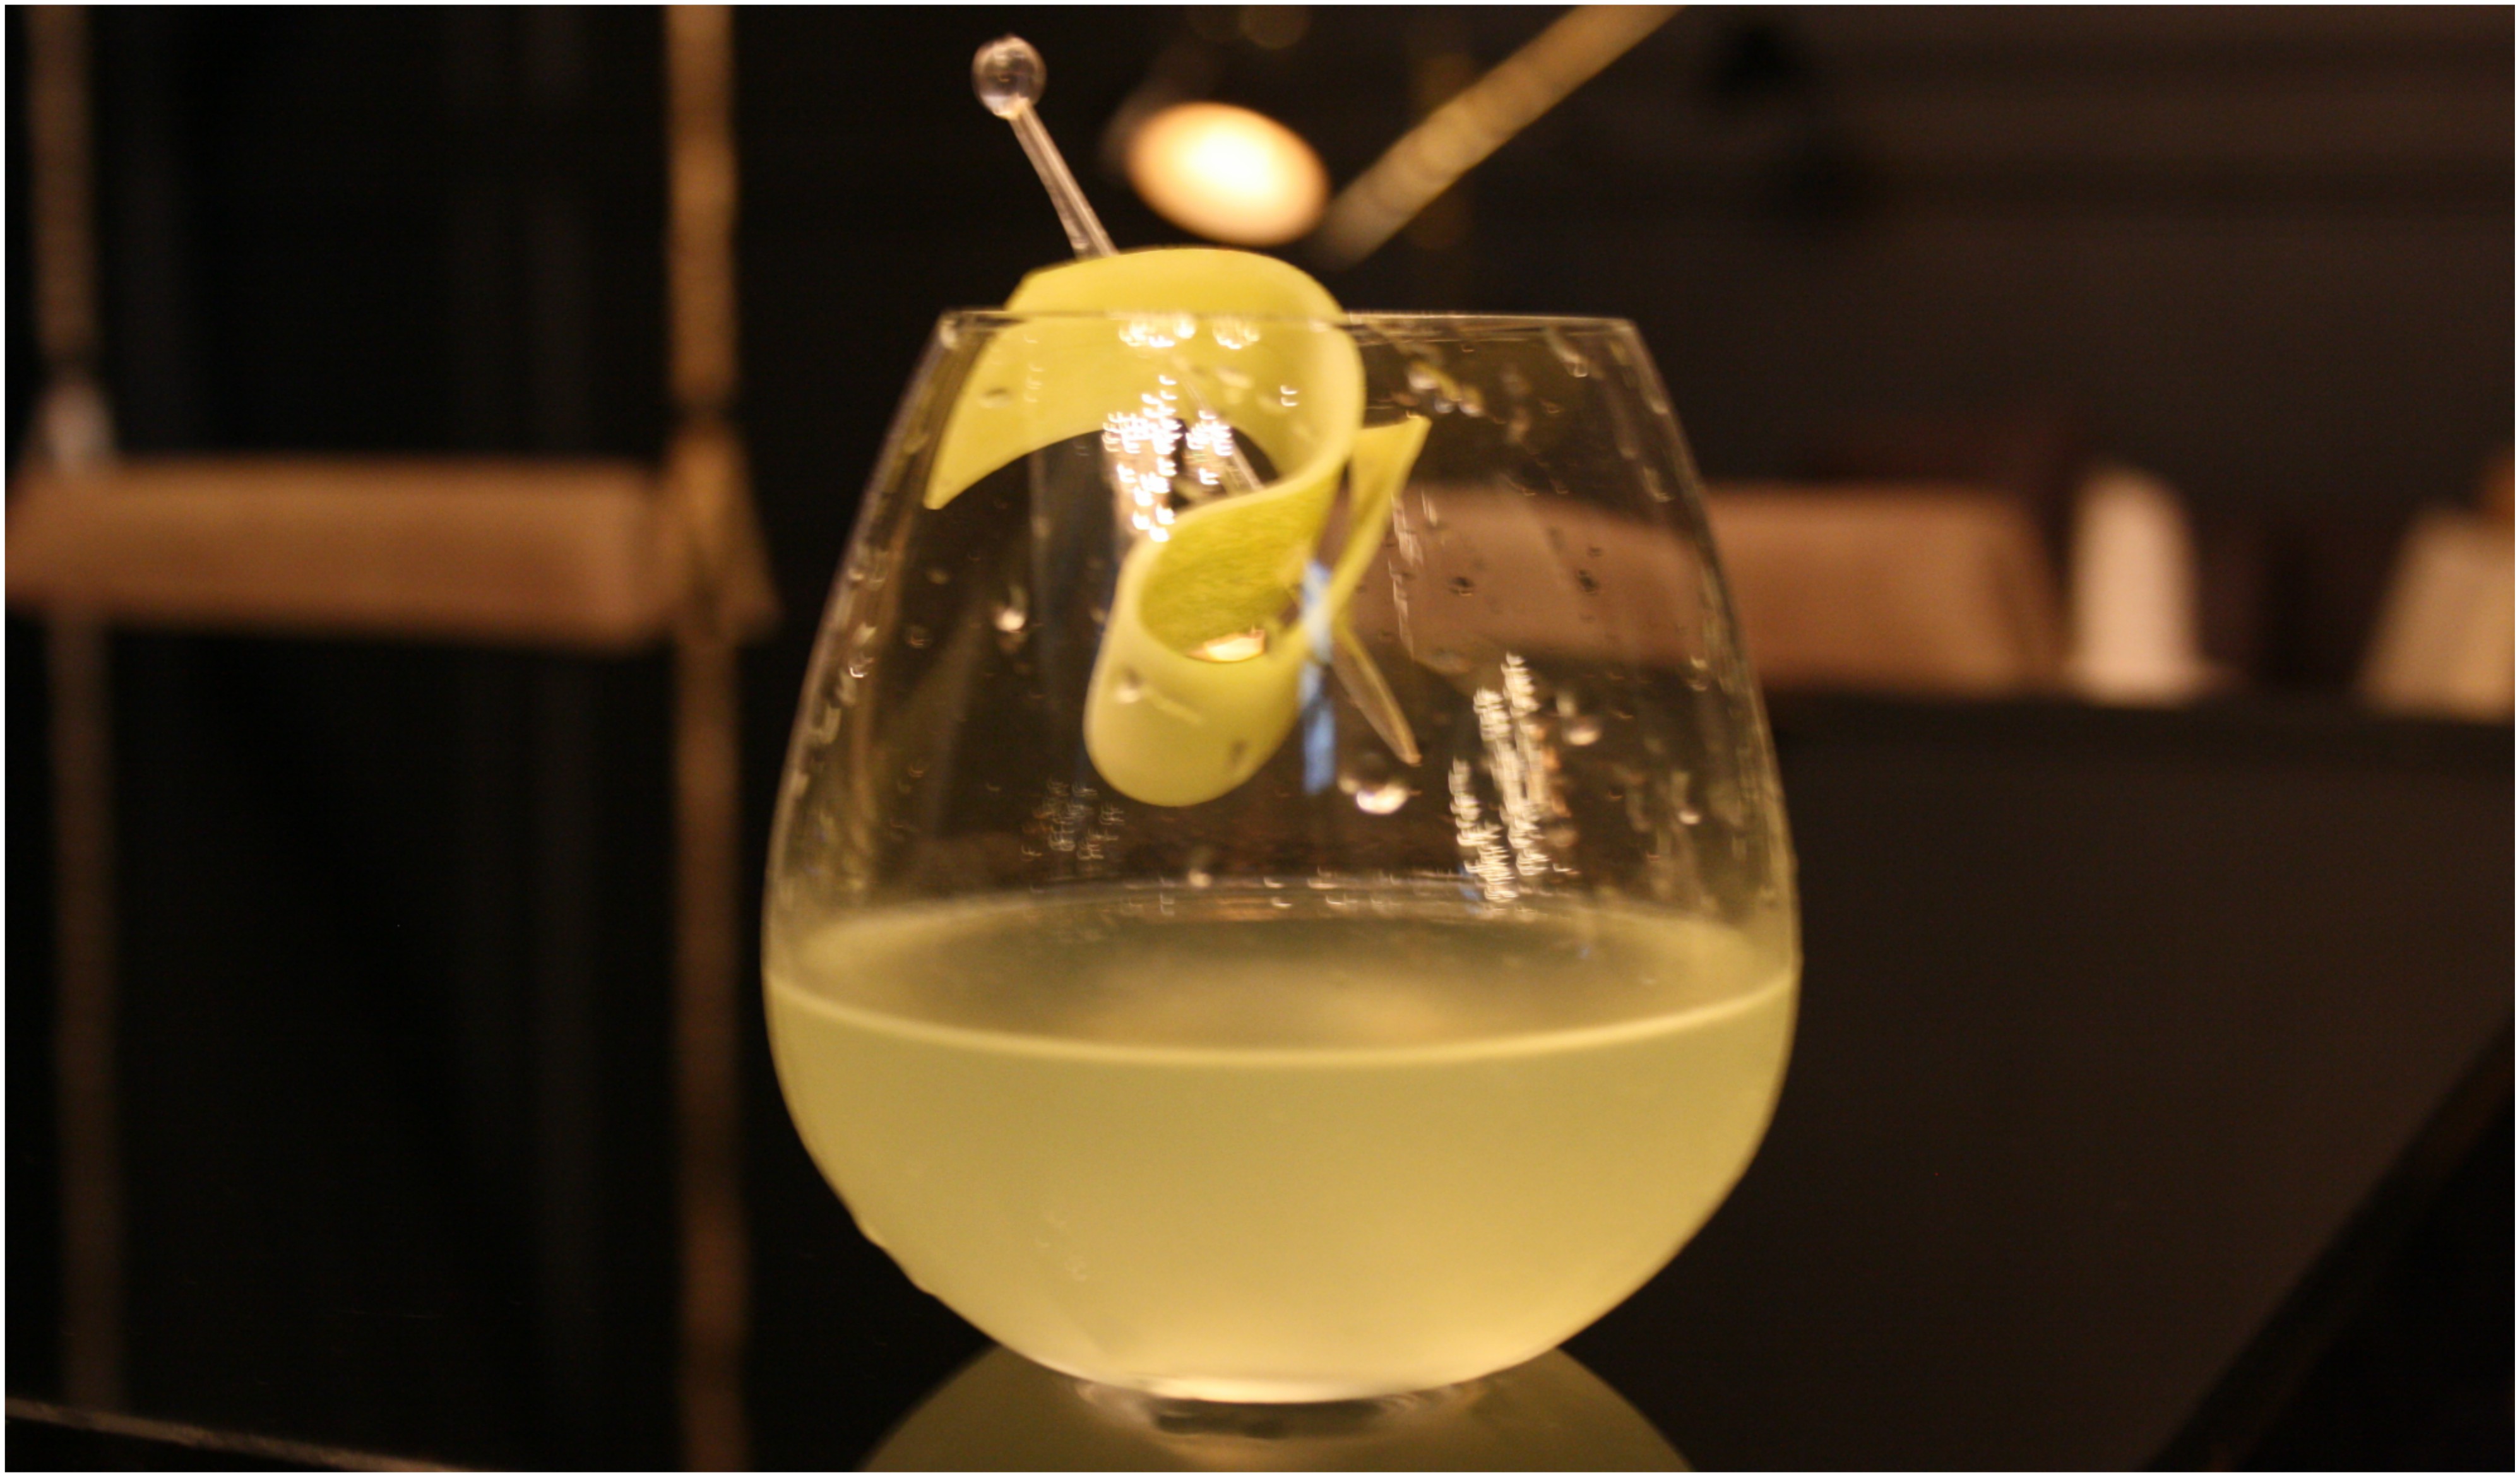 Strozzi - A thoroughly refreshing cocktail made of vodka, cucumber, mint and sour mix. The looks are unassuming but this one sure is potent